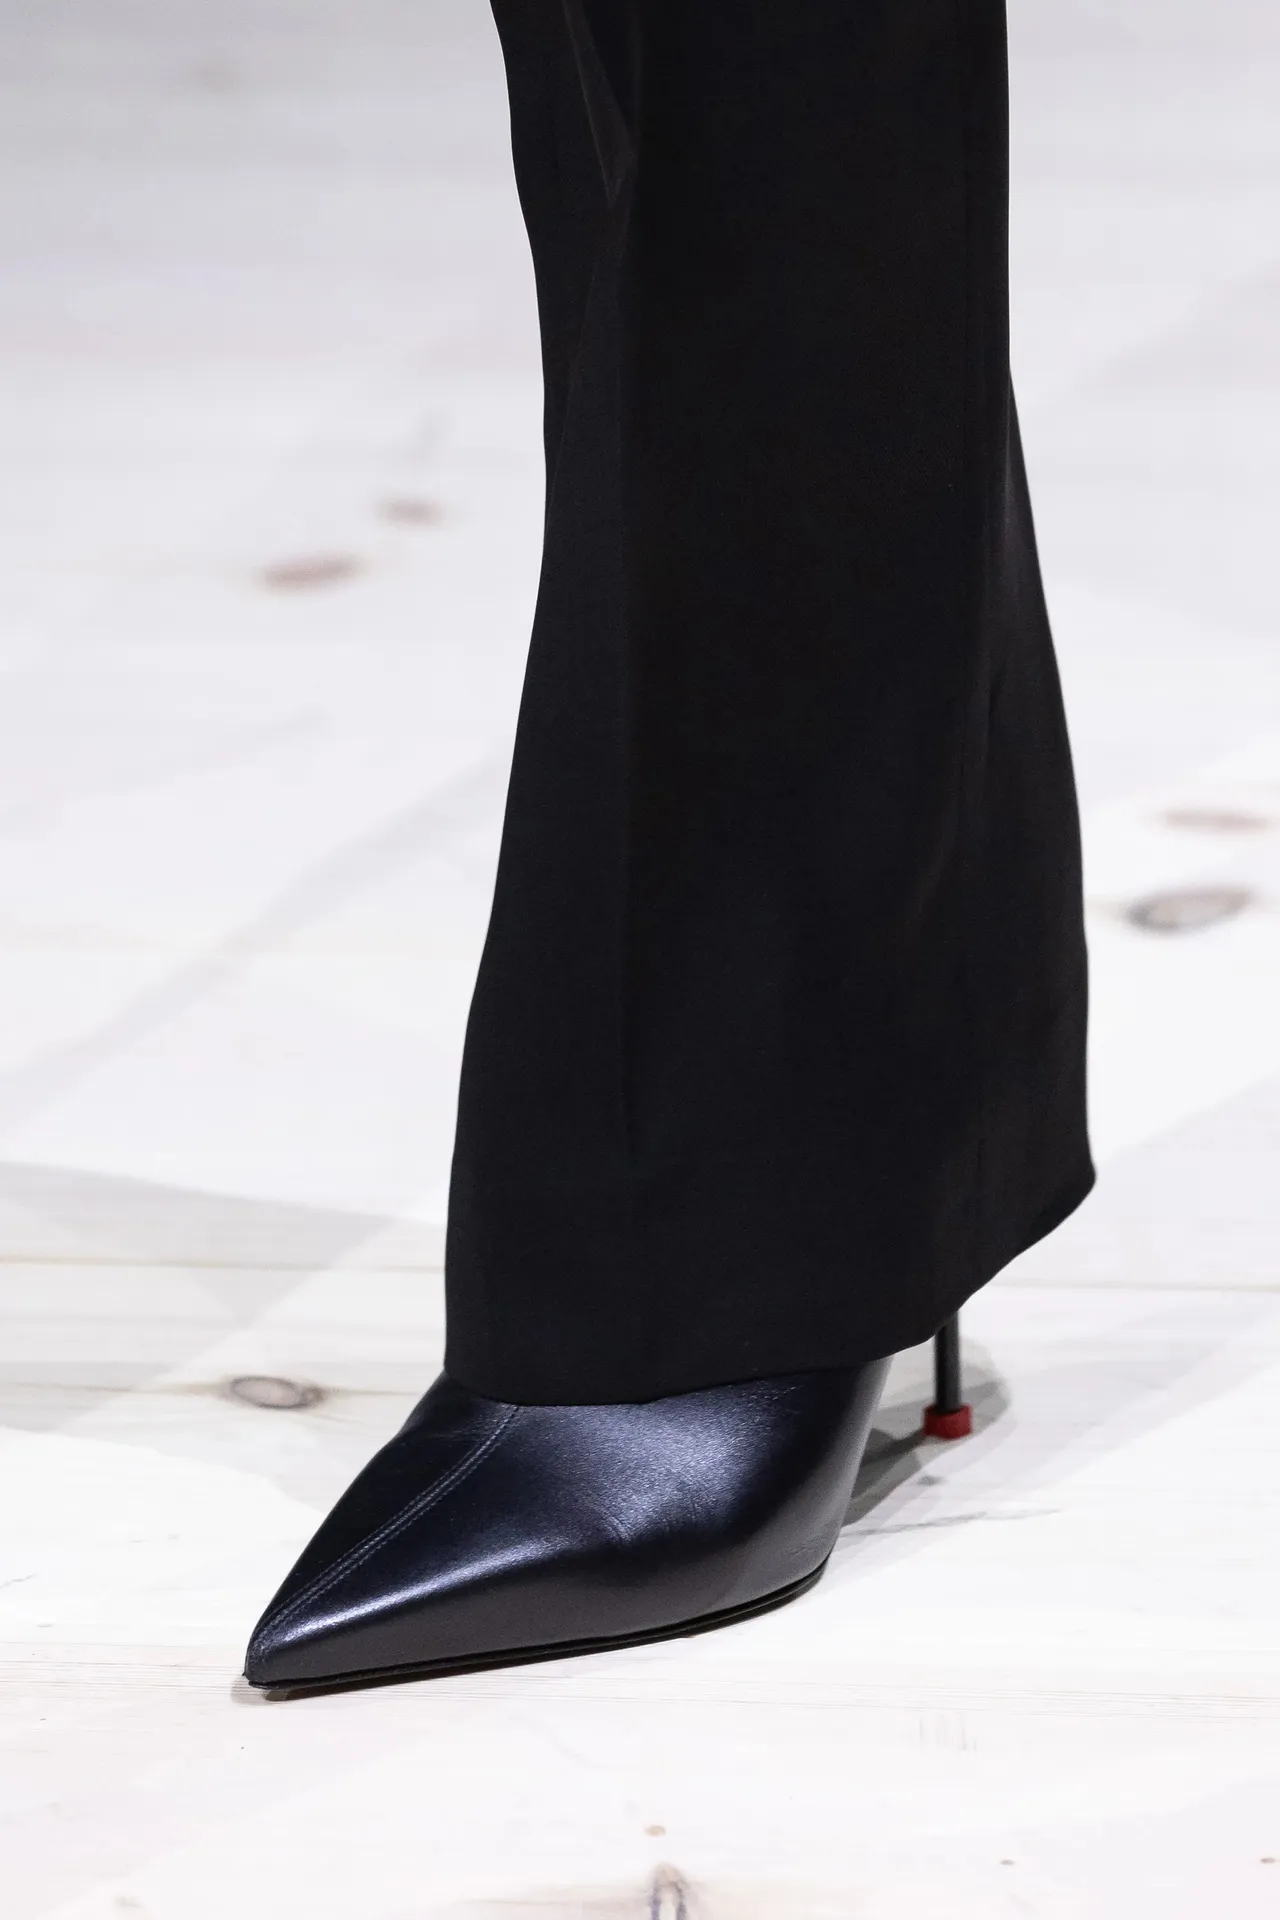 A snapshot of poise and sophistication: the image features a sleek, black pointed-toe shoe by Alexander McQueen peeking out from beneath the hem of tailored trousers. The shoe's silhouette is the epitome of elegance, its smooth leather surface catching the light just so. The subtle hint of a red sole adds an unexpected pop of colour, a signature nod to the world of high fashion. This is more than footwear; it's a statement, a piece of art that stands confidently on the wooden floor.